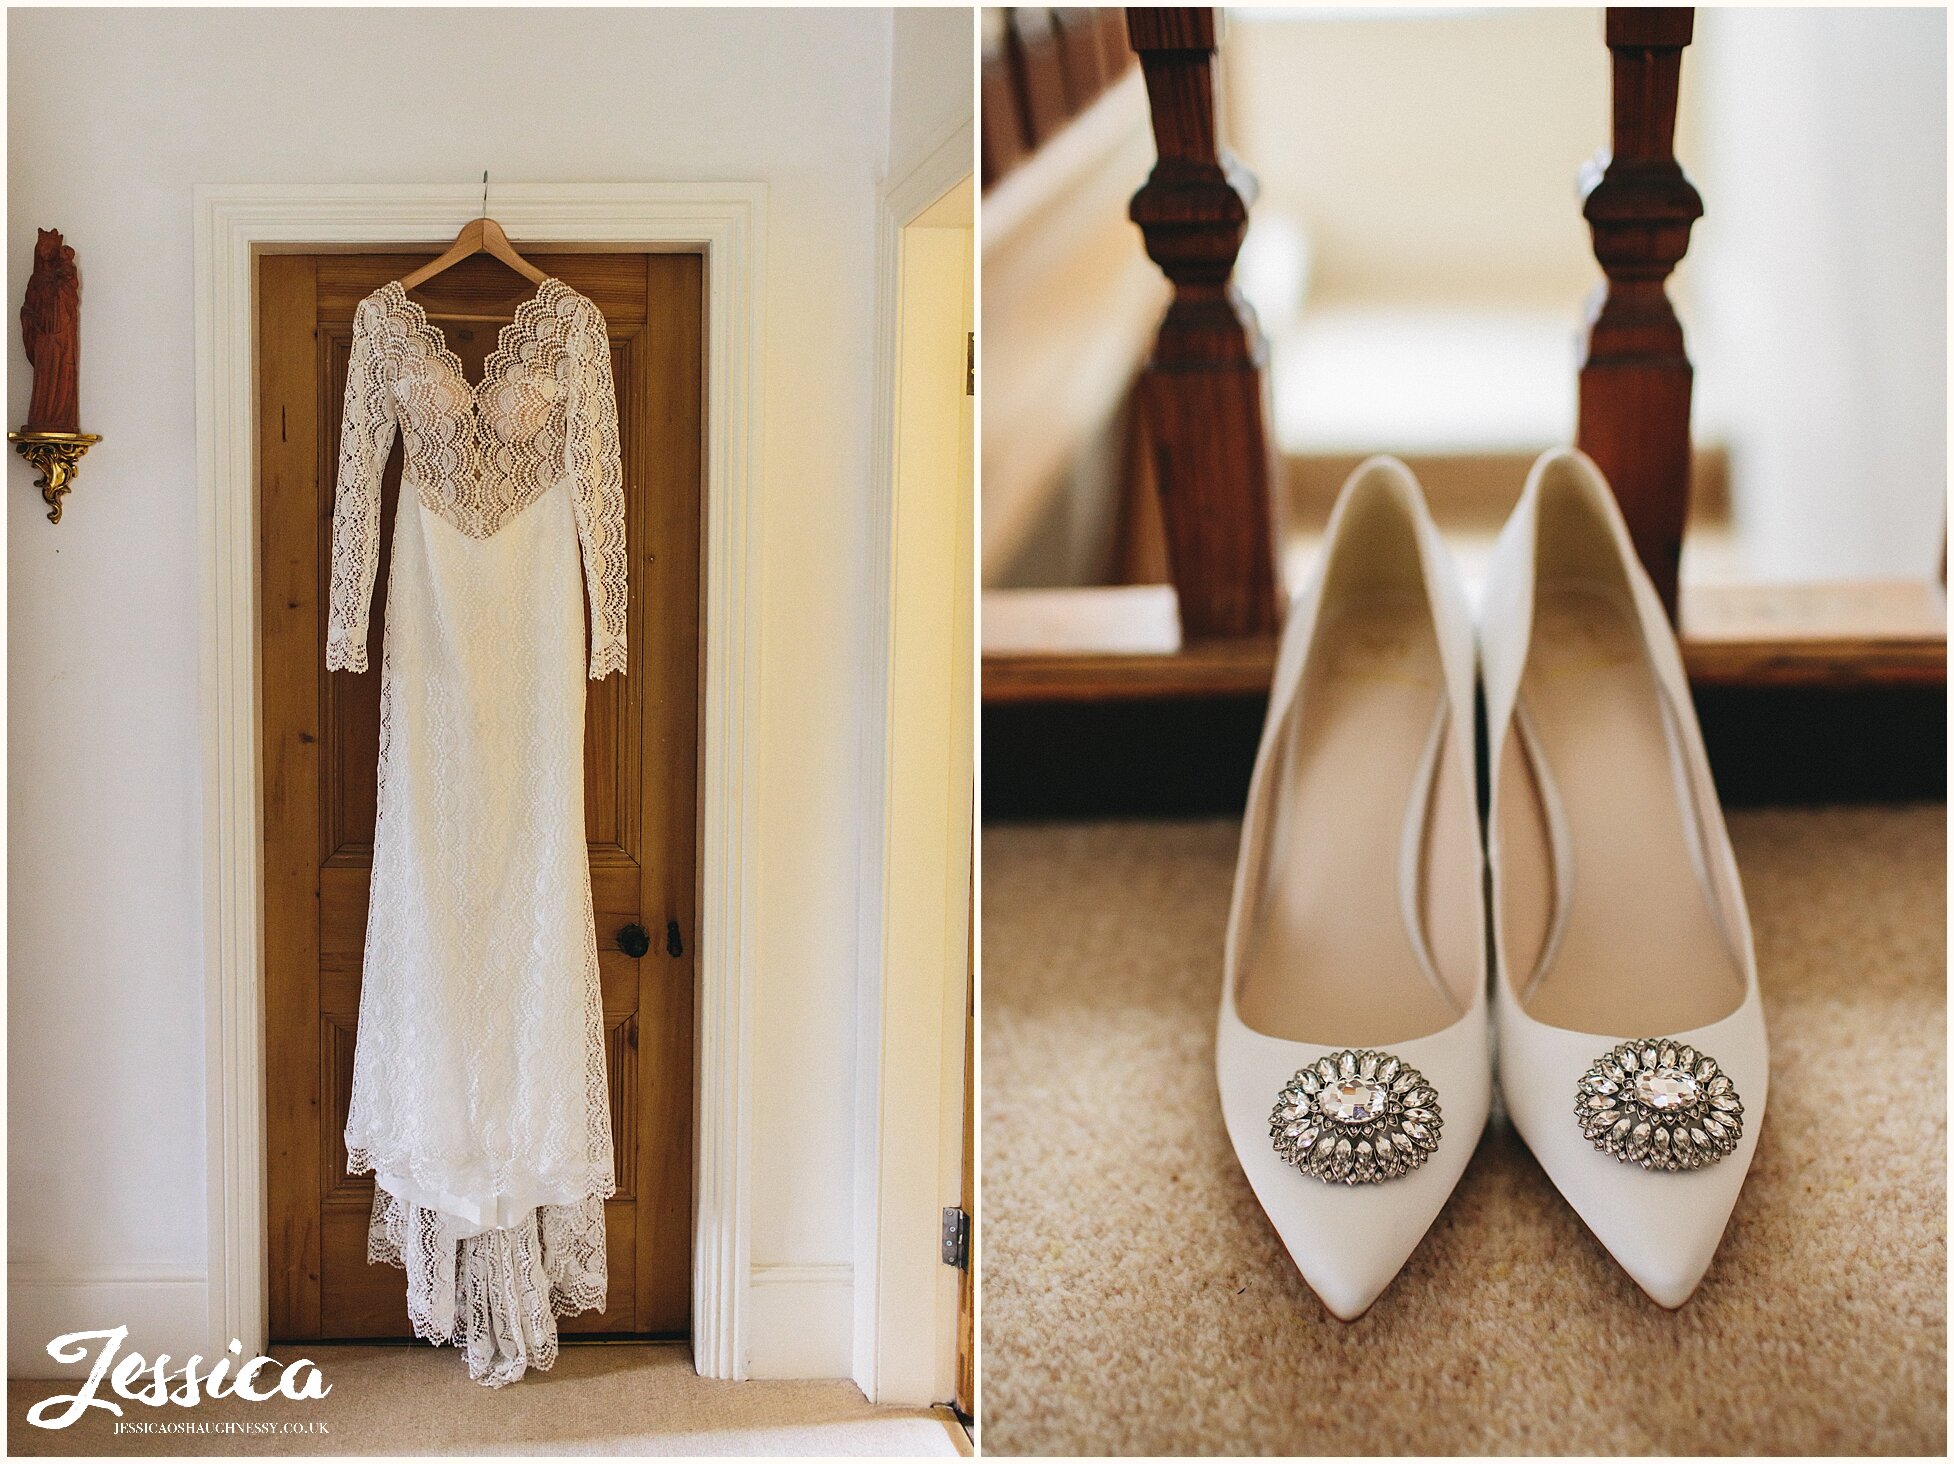 wedding dress and bridal shoes at the brides home in liverpool